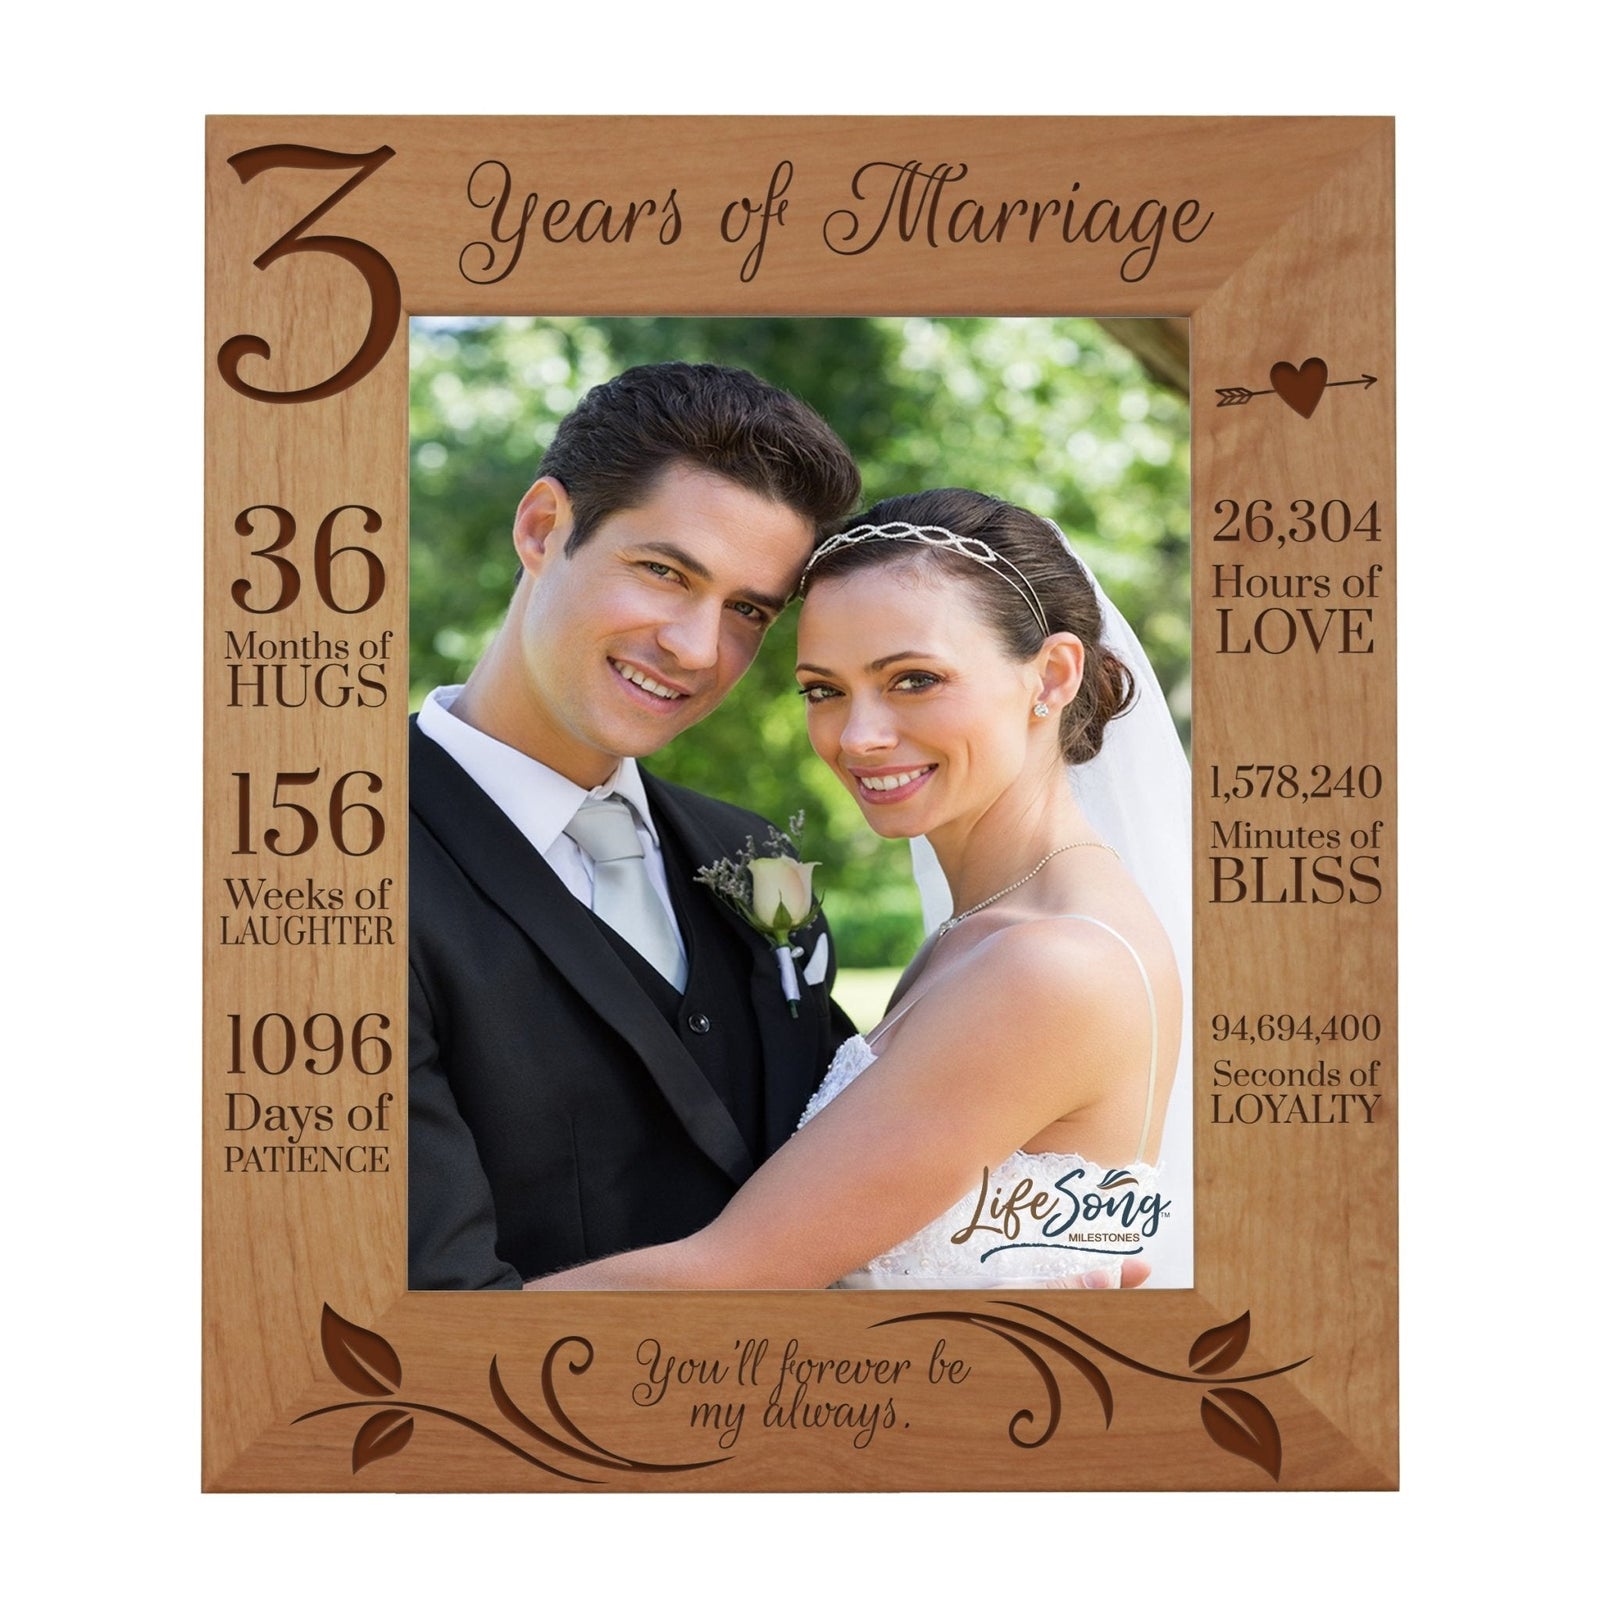 Couples 3rd Wedding Anniversary Photo Frame Home Decor Gift Ideas - Forever Be My Always - LifeSong Milestones